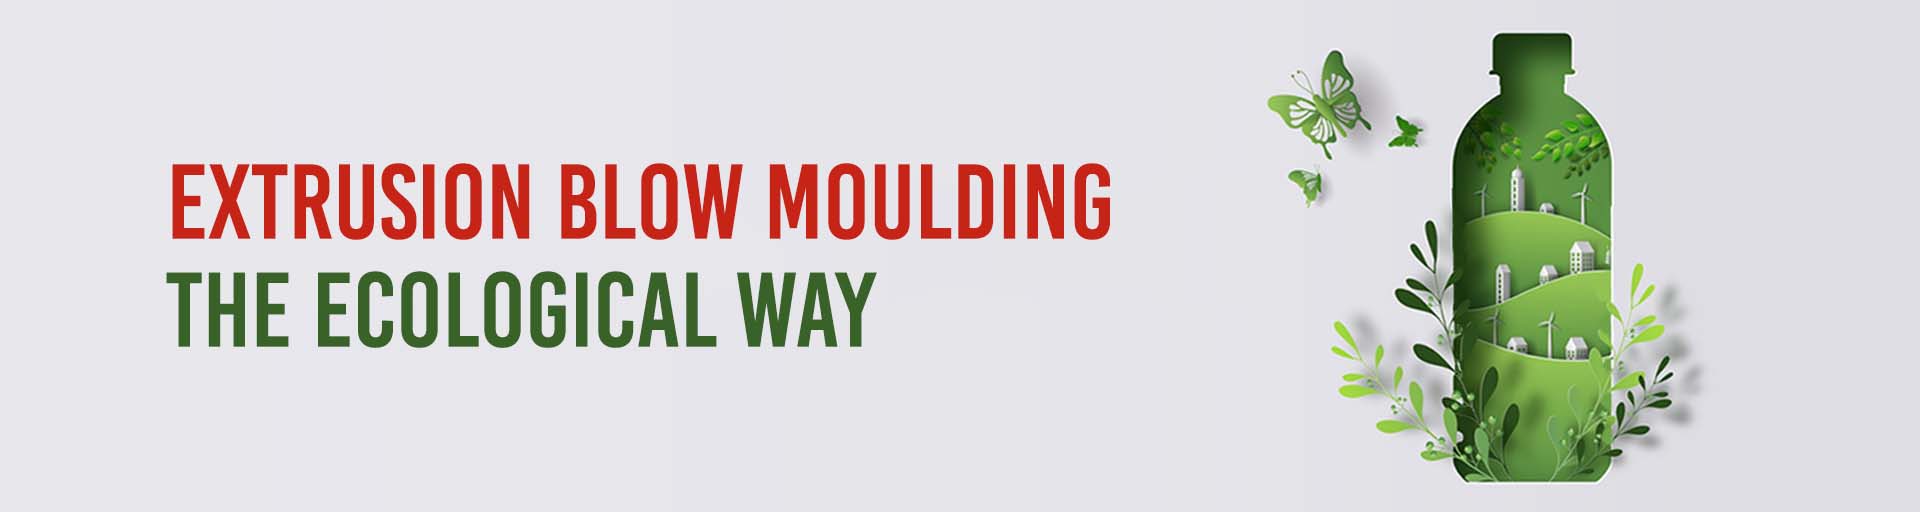 Extrusion-Blow-Moulding